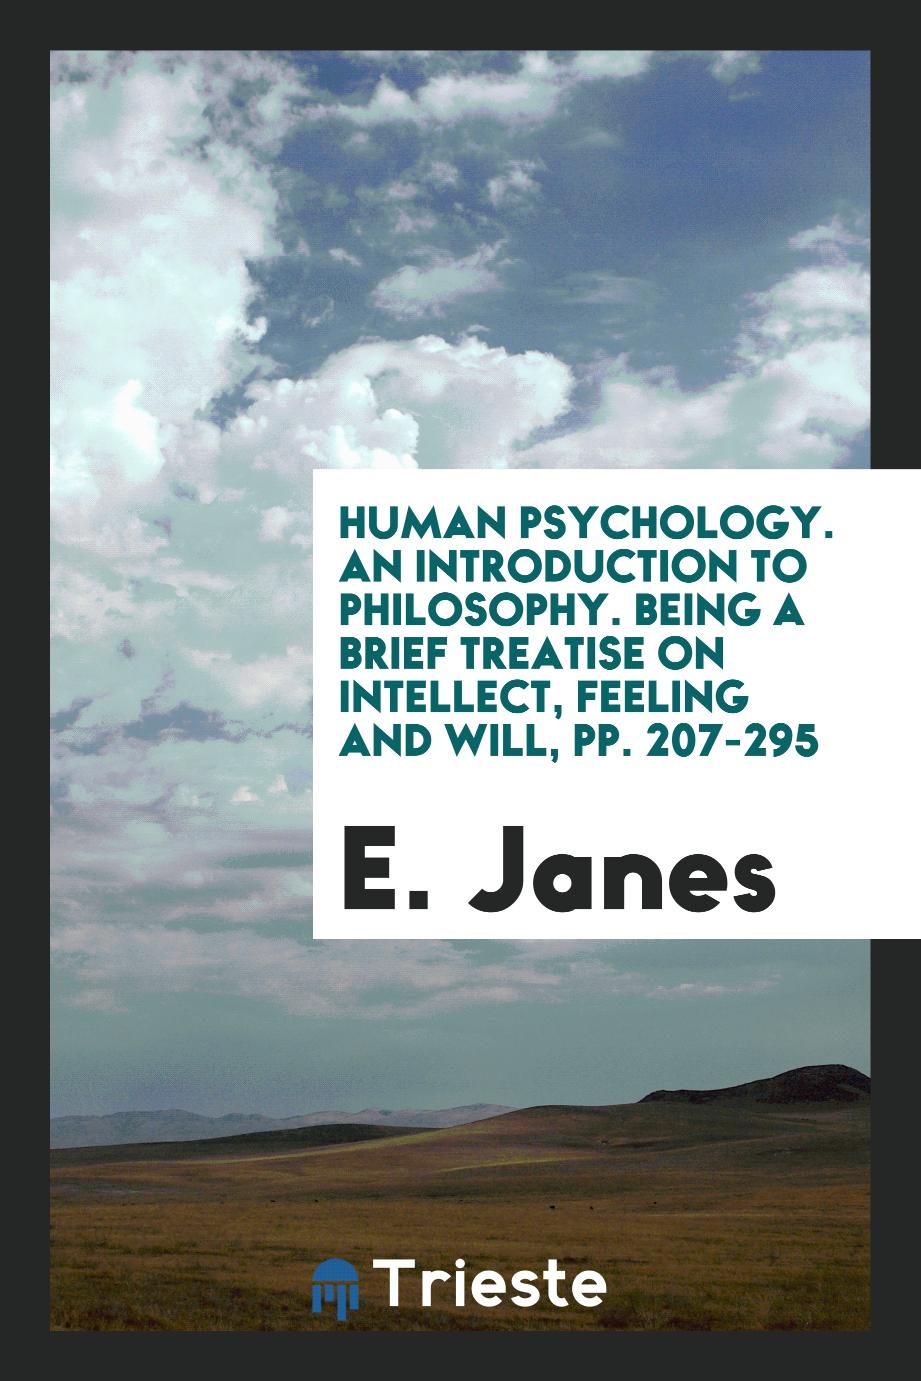 Human Psychology. An Introduction to Philosophy. Being a Brief Treatise on Intellect, Feeling and Will, pp. 207-295